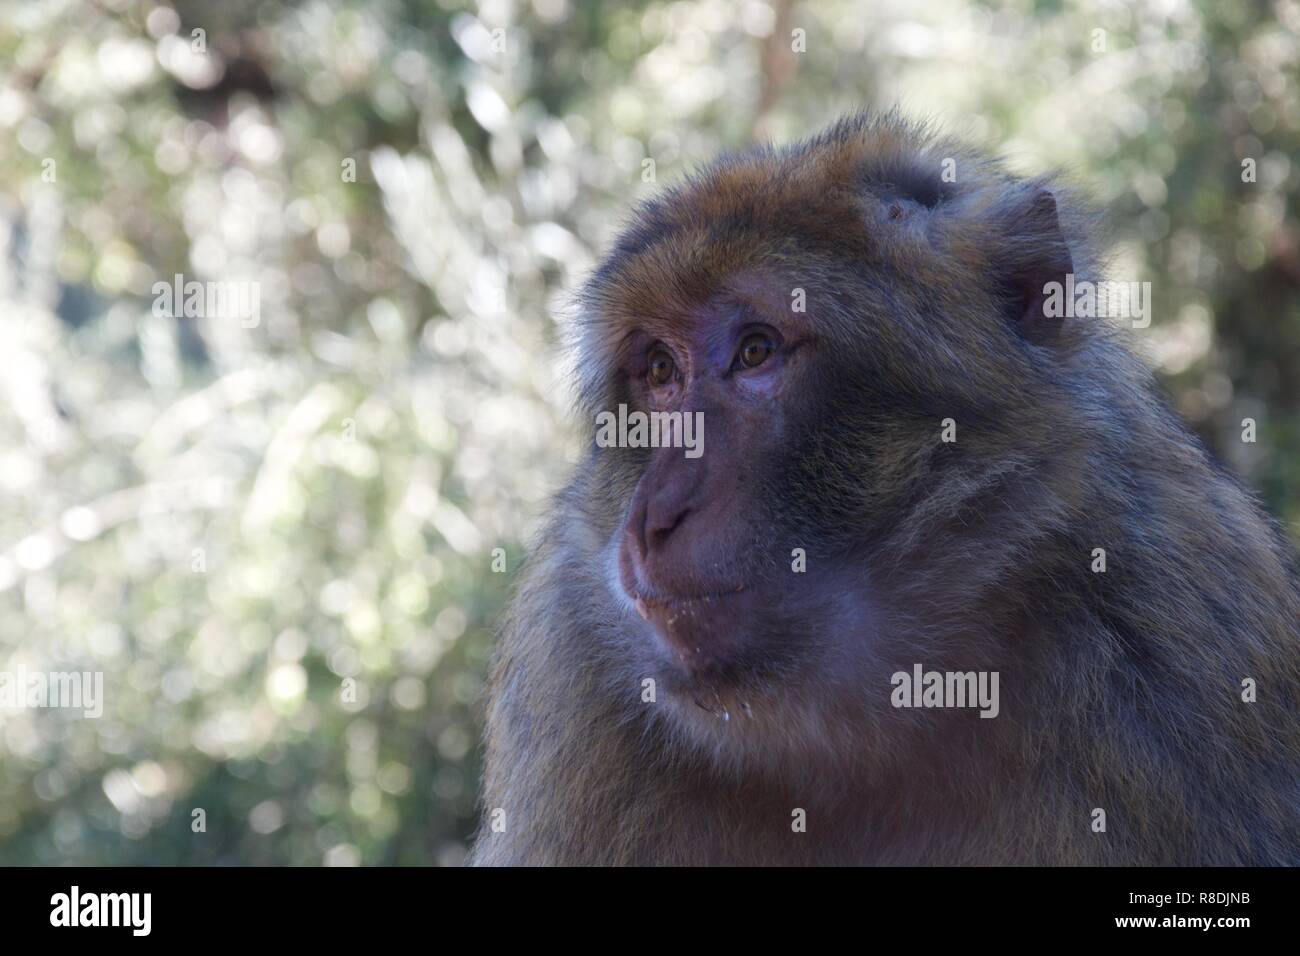 Close up on the face of a solemn monkey with crumbs in its facial fur Stock Photo